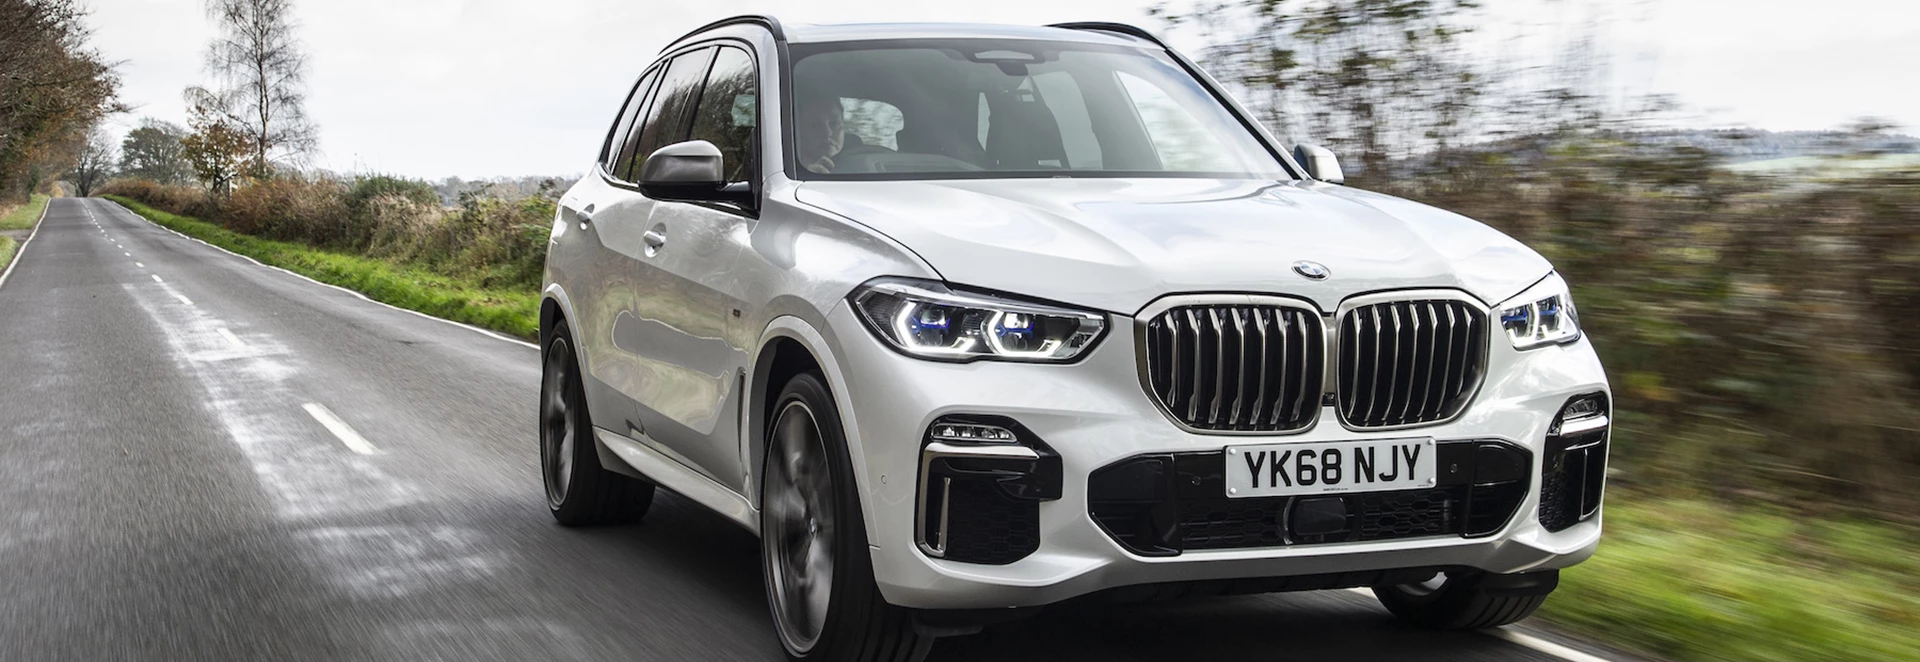 BMW announces new engine option for X5 and X6 SUVs 